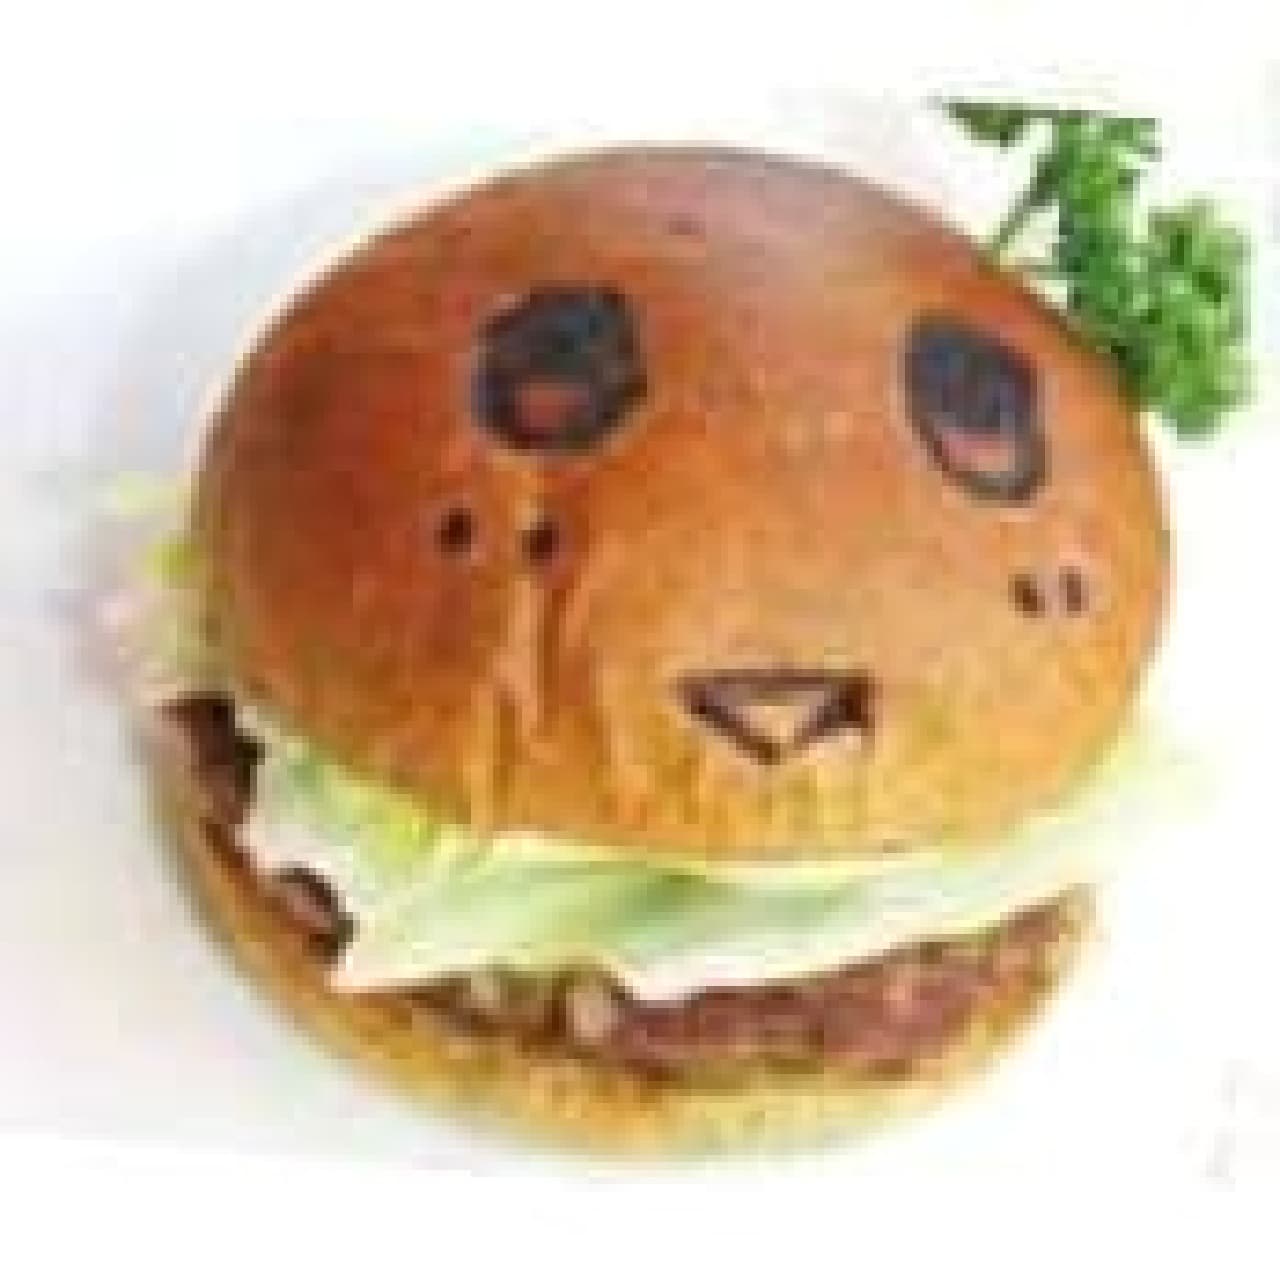 The cute "Funassyi Burger" is now on sale!